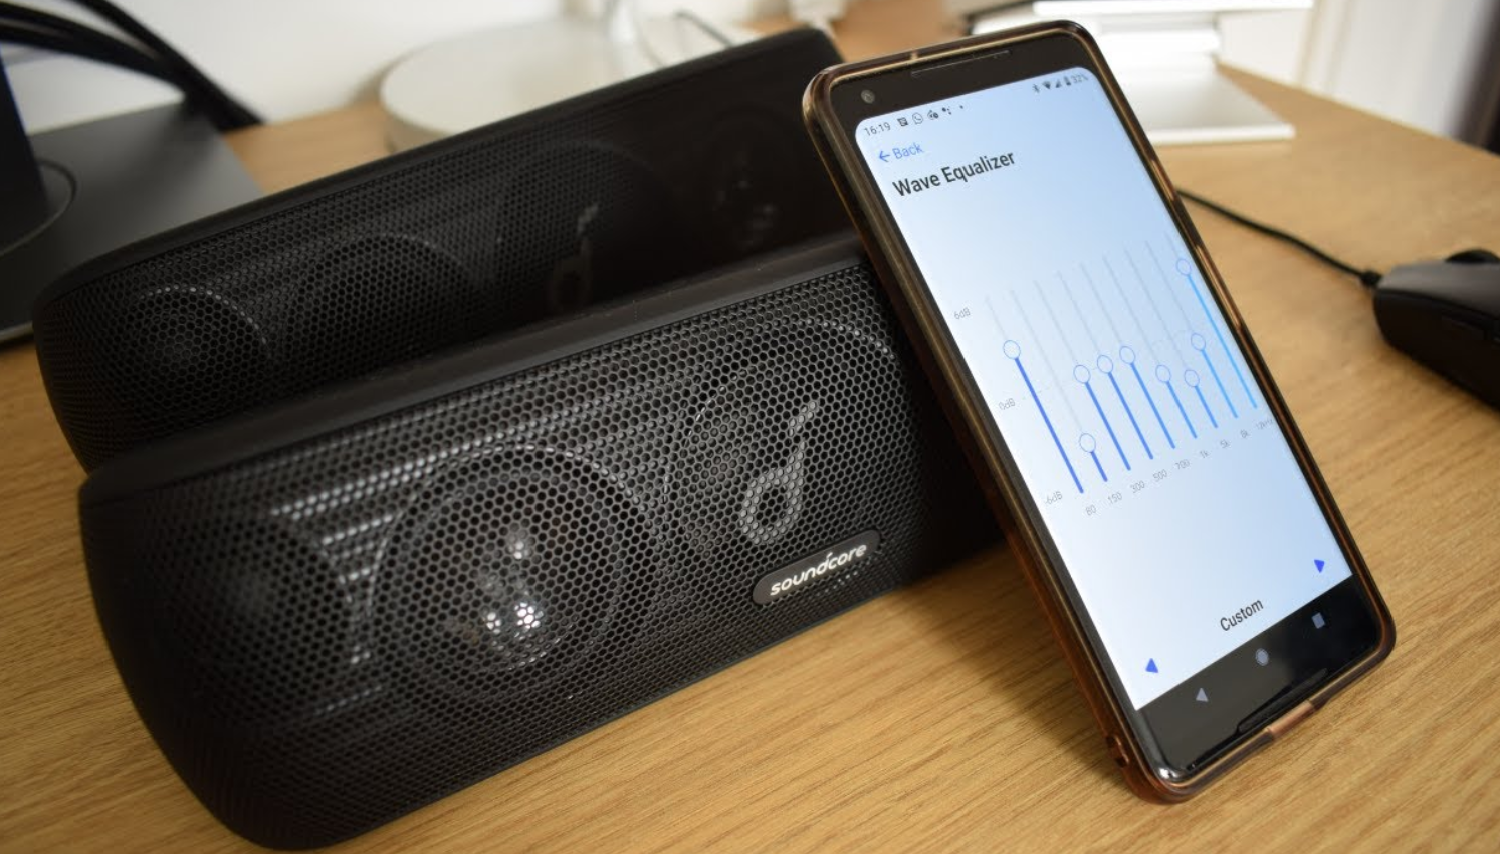 dive into your anker speaker's settings